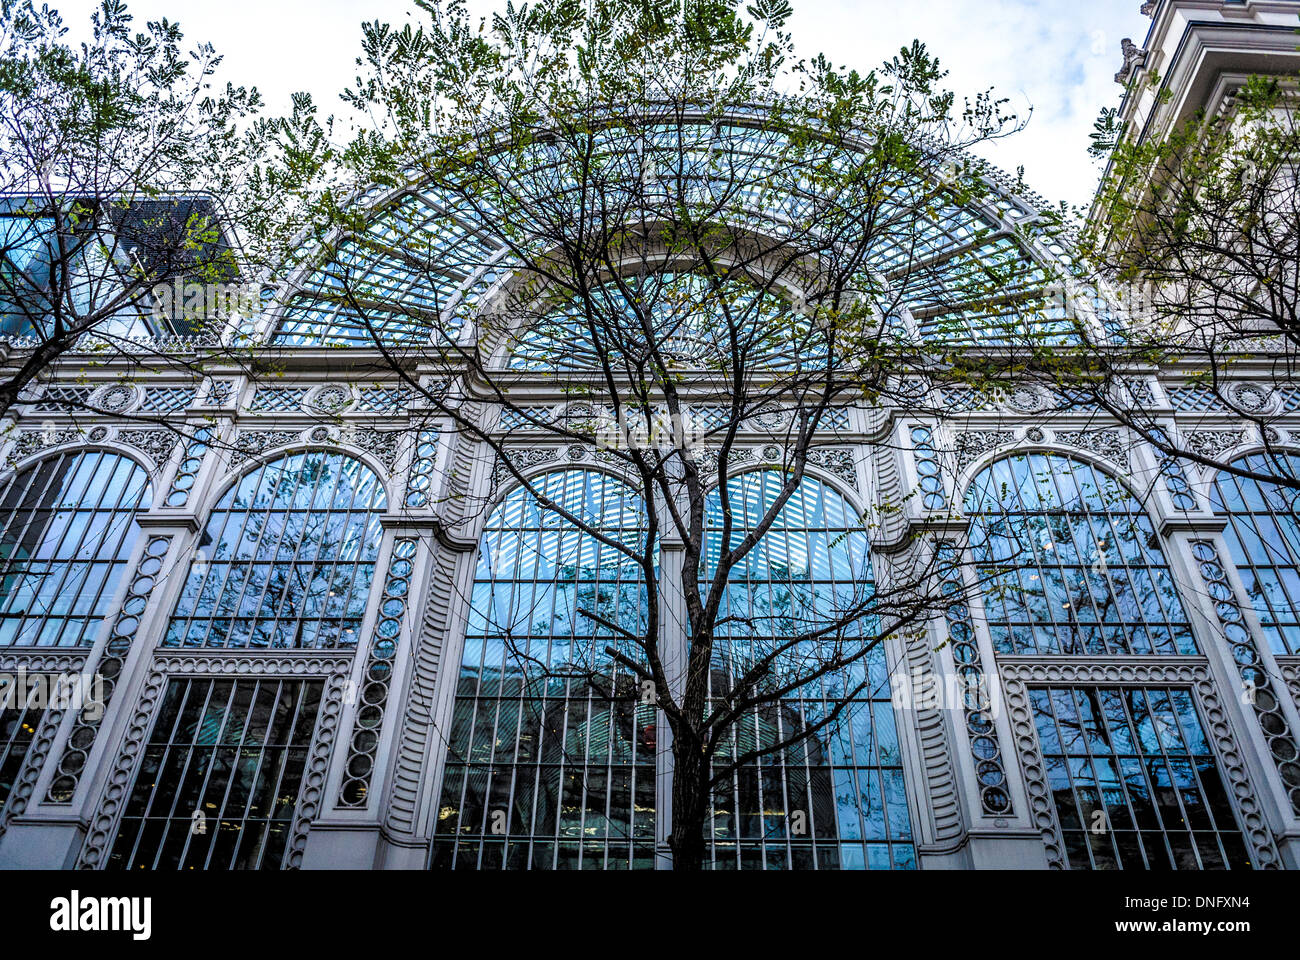 The cast iron and glass façade of the Paul Hamlyn Hall (Old Floral Hall). Part of the Royal Opera House, London. Stock Photo